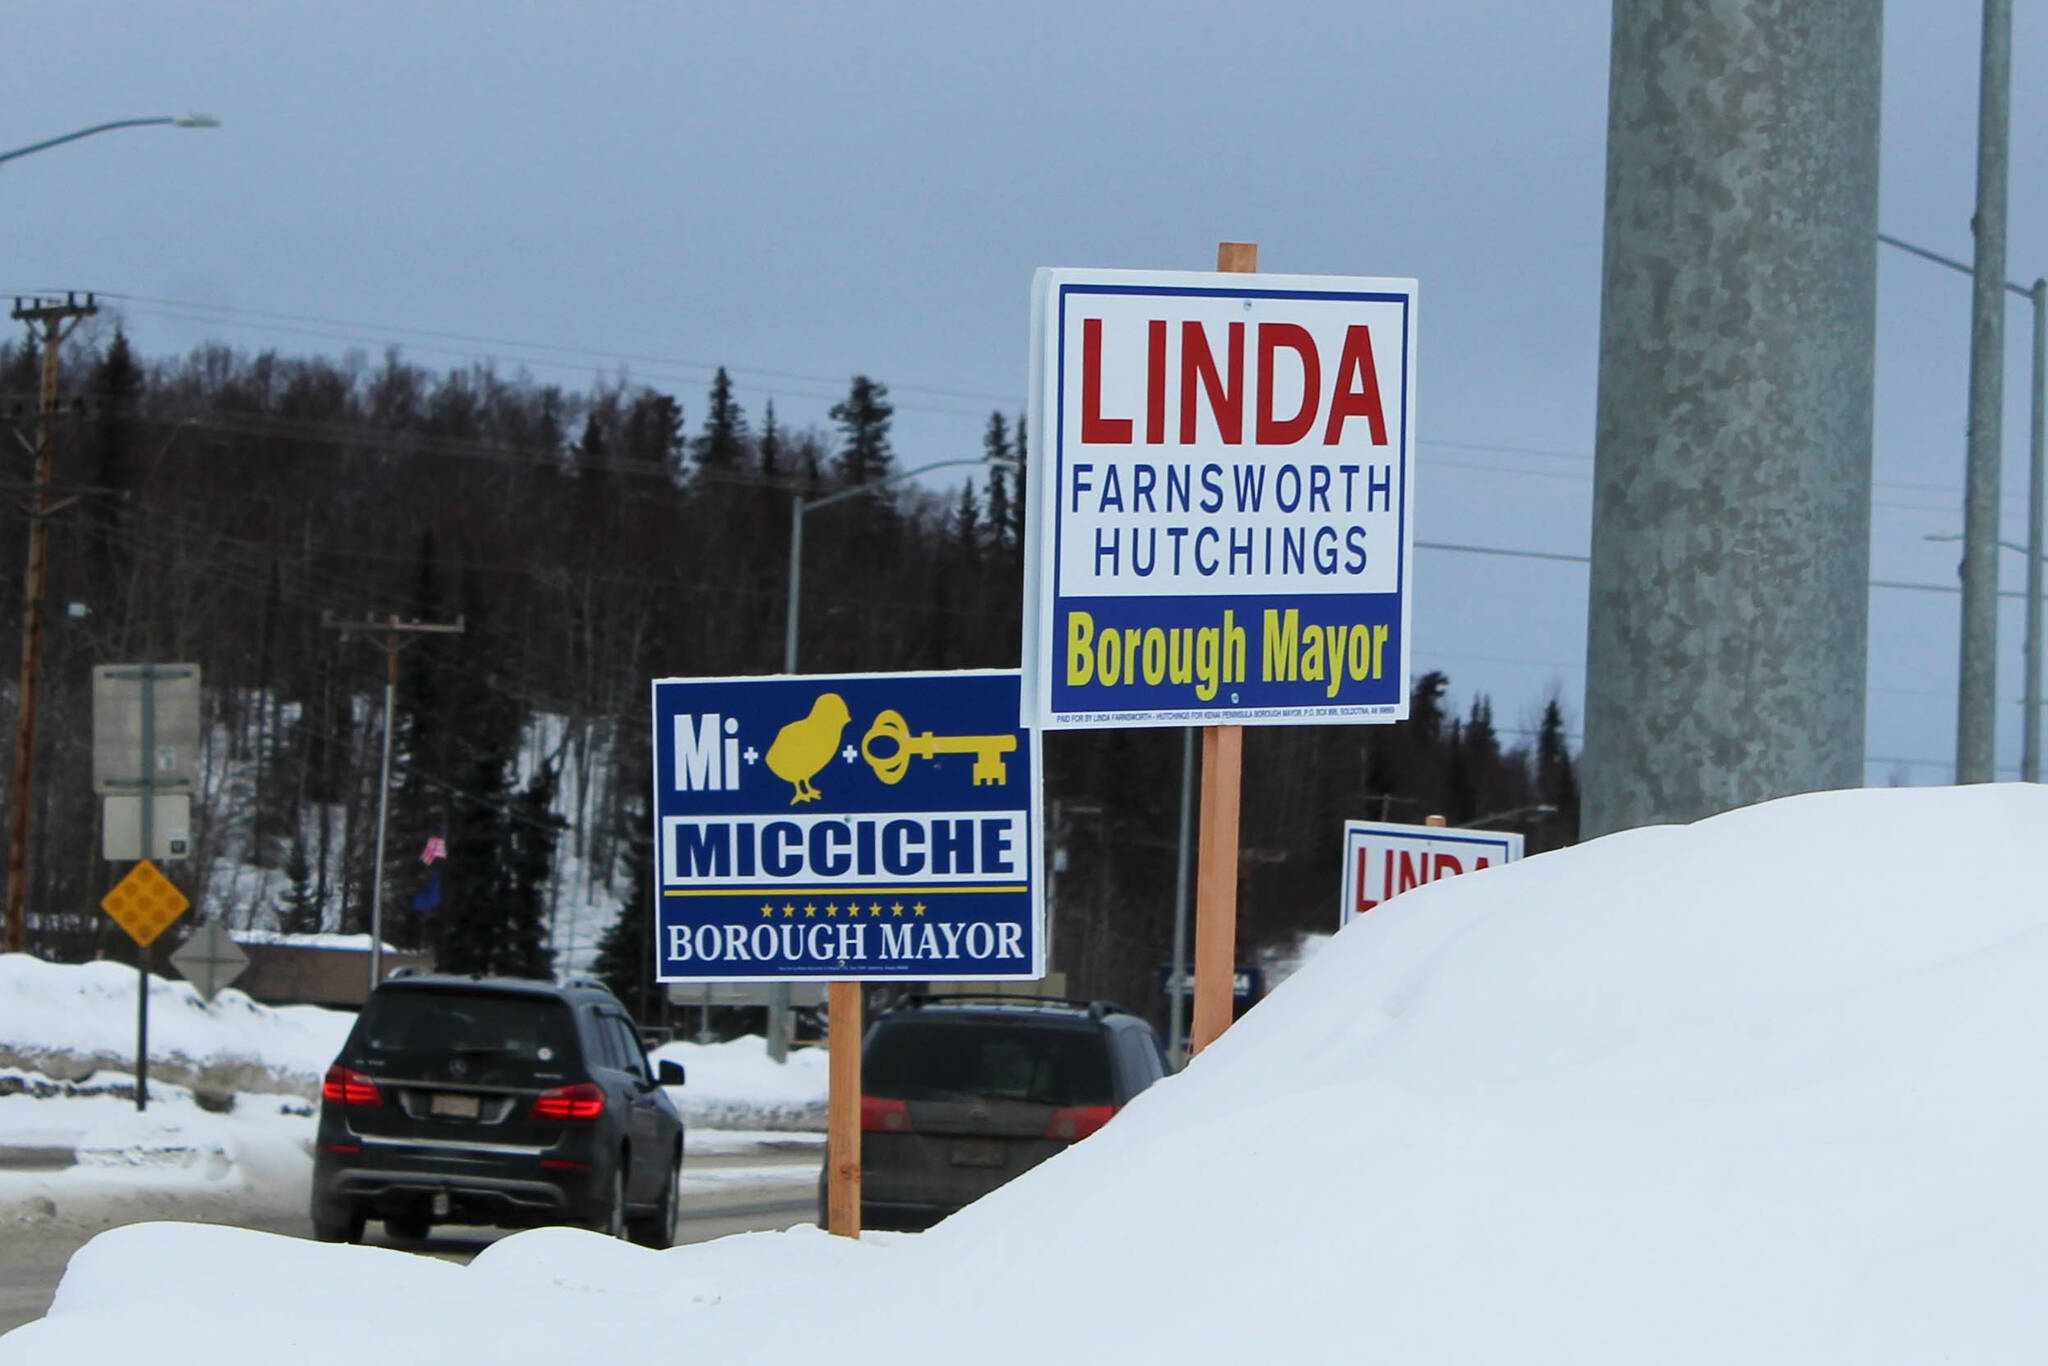 Signs supporting Kenai Peninsula Borough mayoral candidates Peter Micciche and Linda Farnsworth-Hutchings are staked in the snow at the intersection of the Kenai Spur and Sterling highways on Tuesday, Feb. 14, 2023, in Soldotna, Alaska. (Ashlyn O’Hara/Peninsula Clarion)